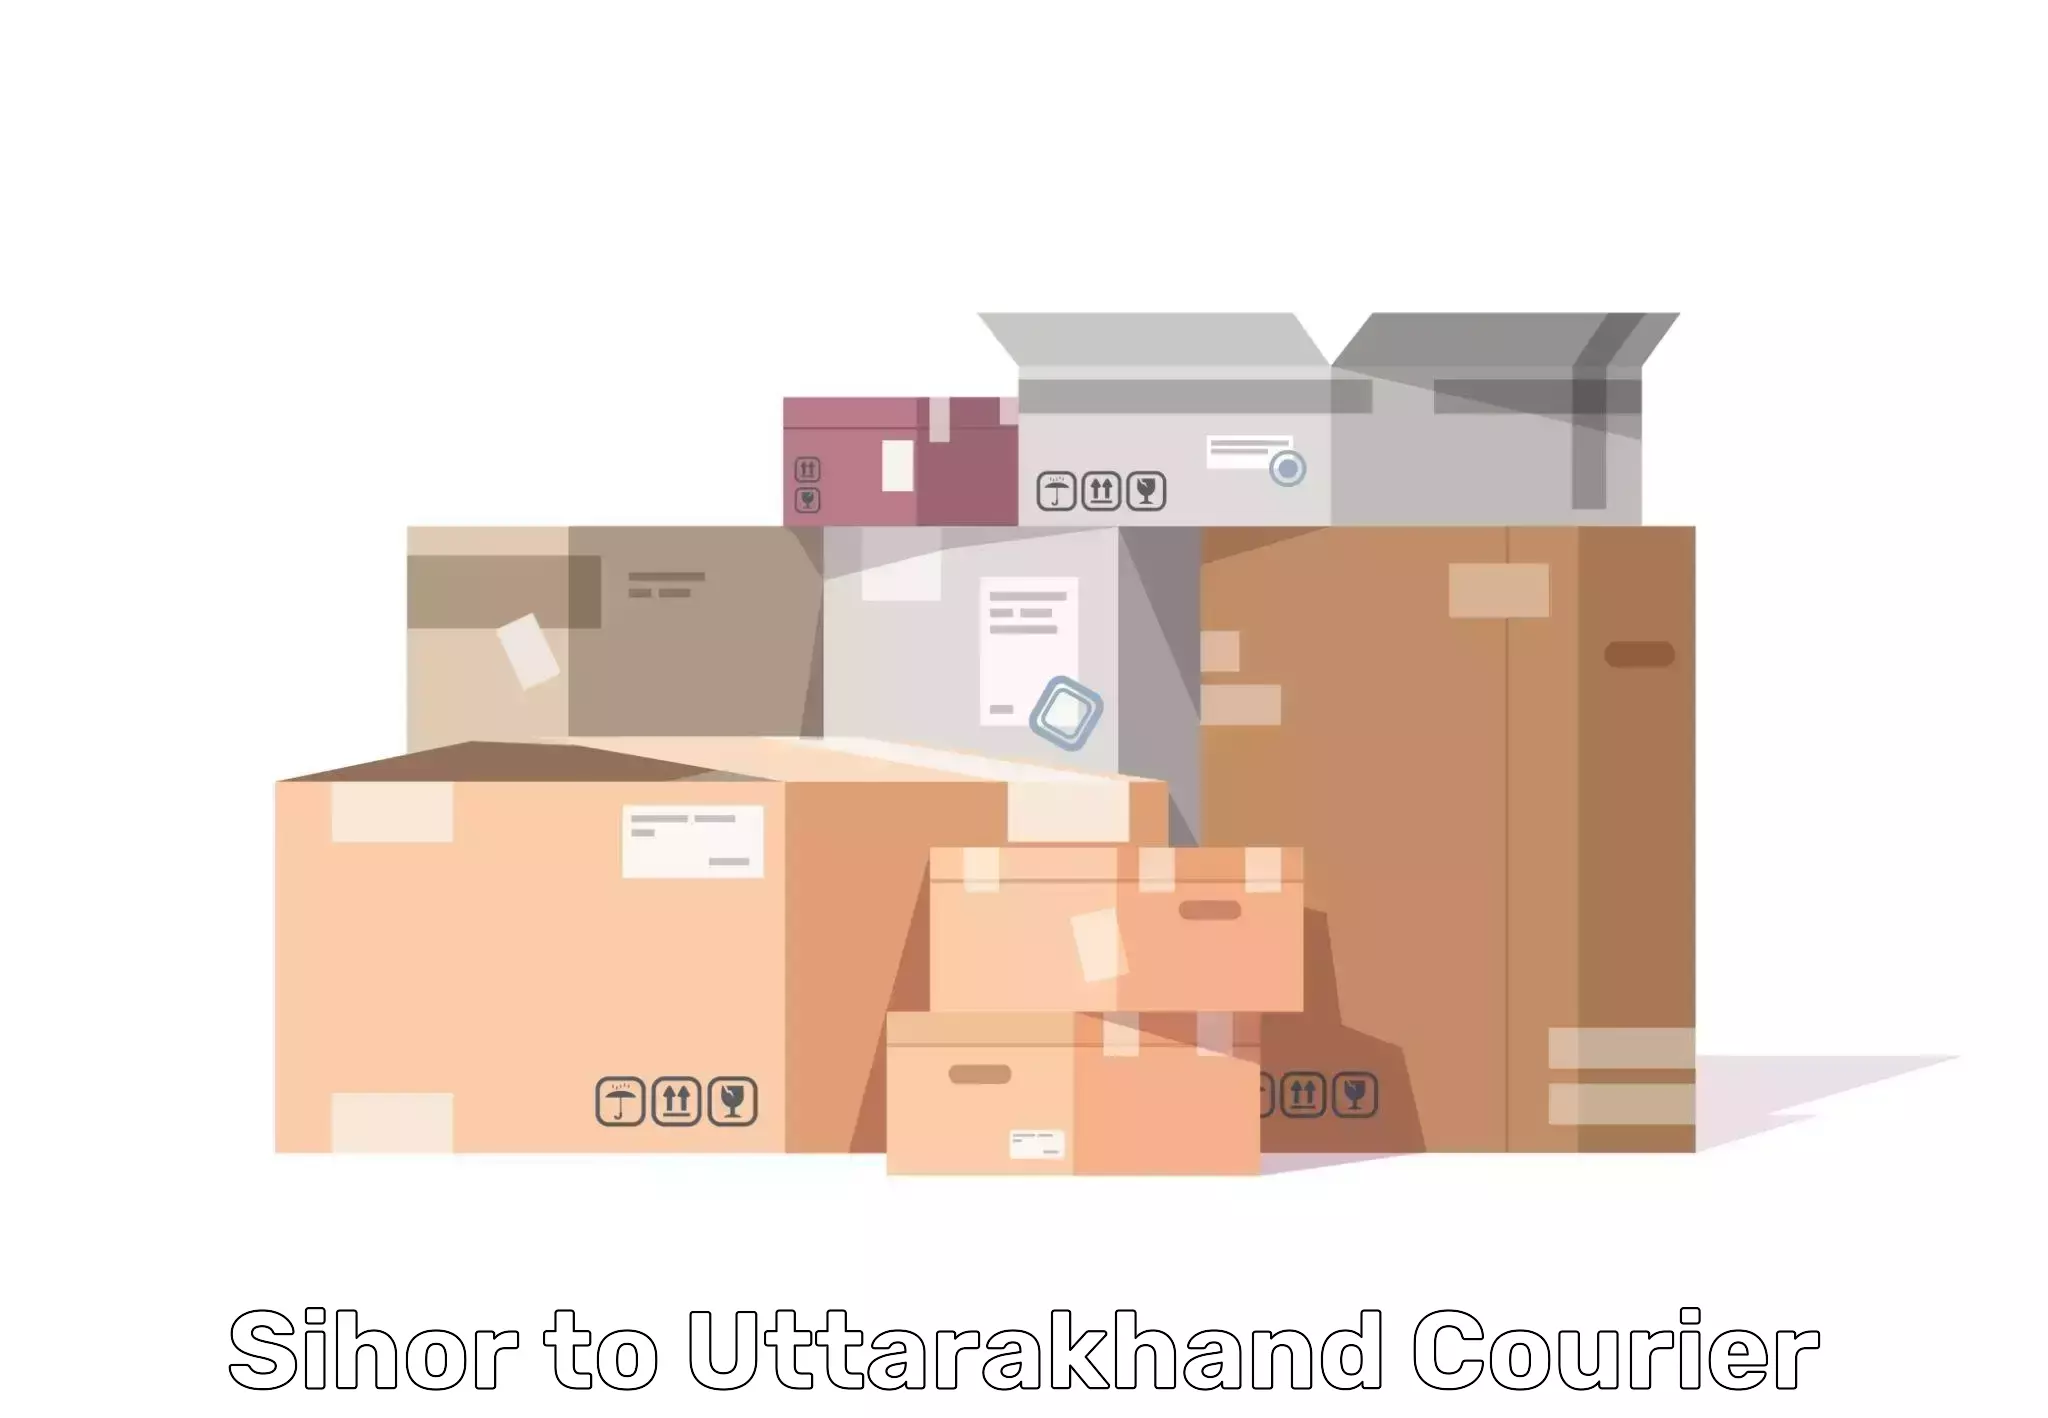 High-quality moving services Sihor to Uttarakhand